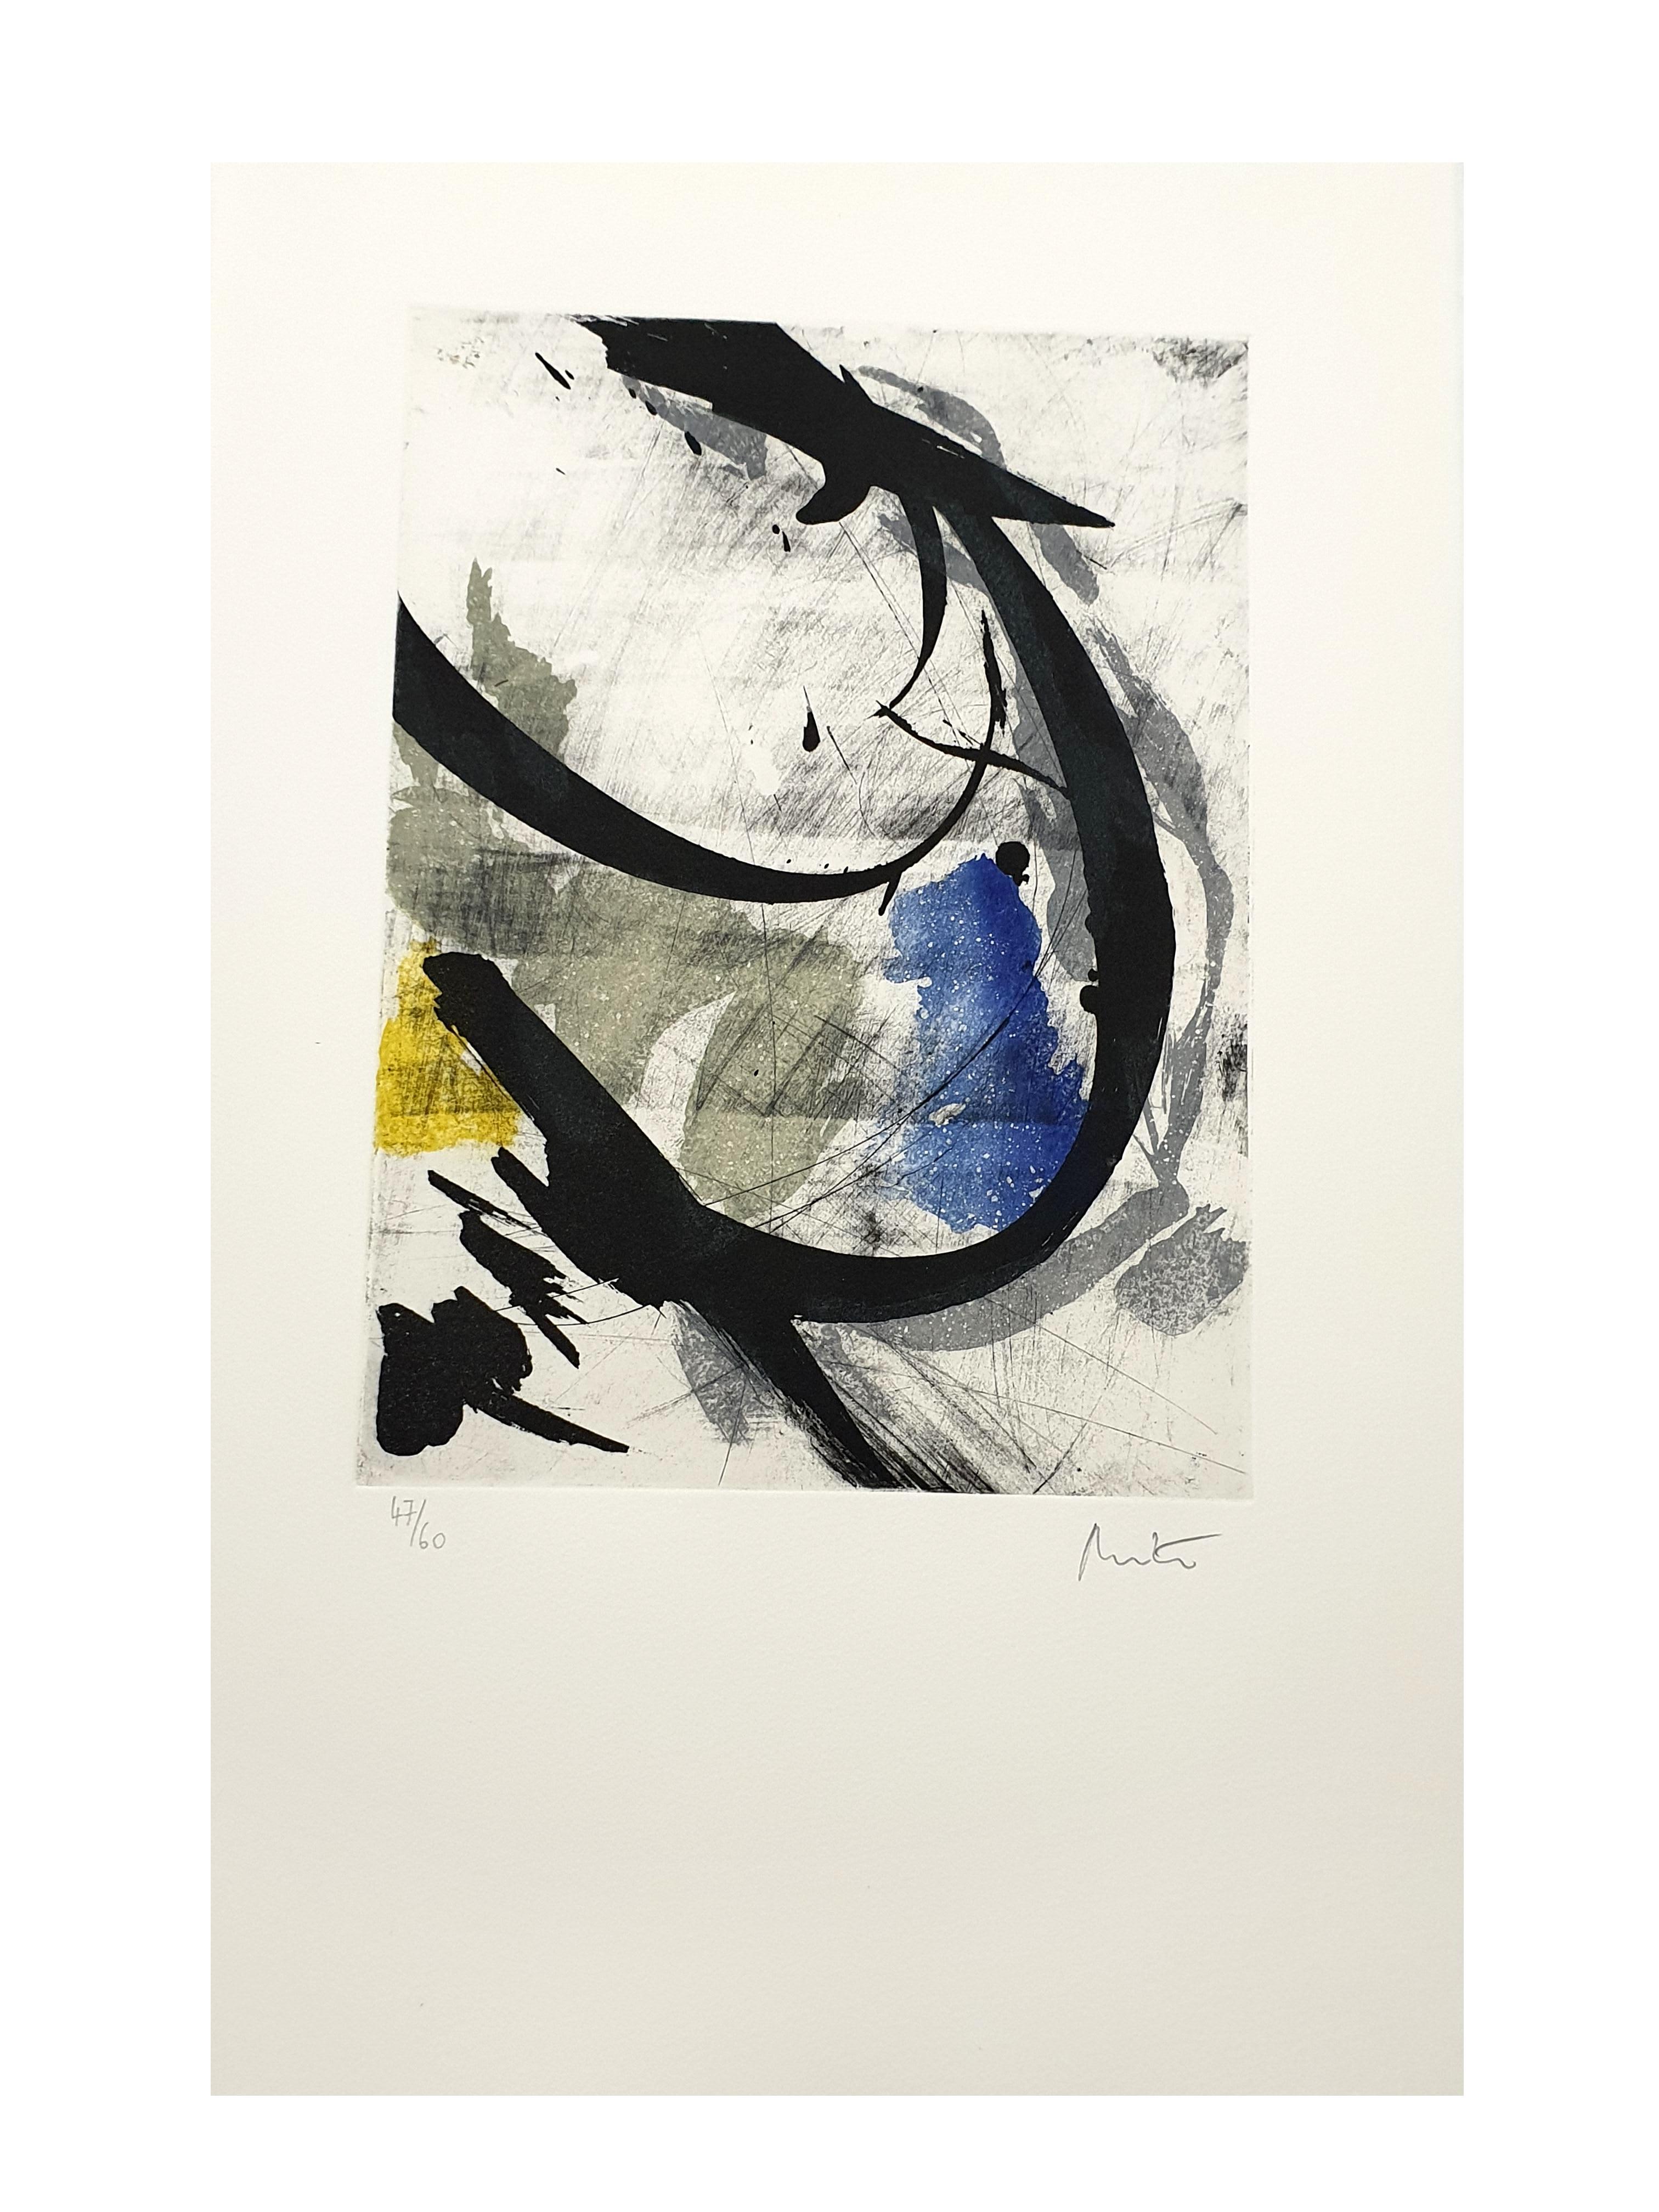 Jean Miotte - Original Signed Etching
1994
Dimensions: 41 x 33 cm
Signed and numbered in pencil
Edition: /60
From Près du mur